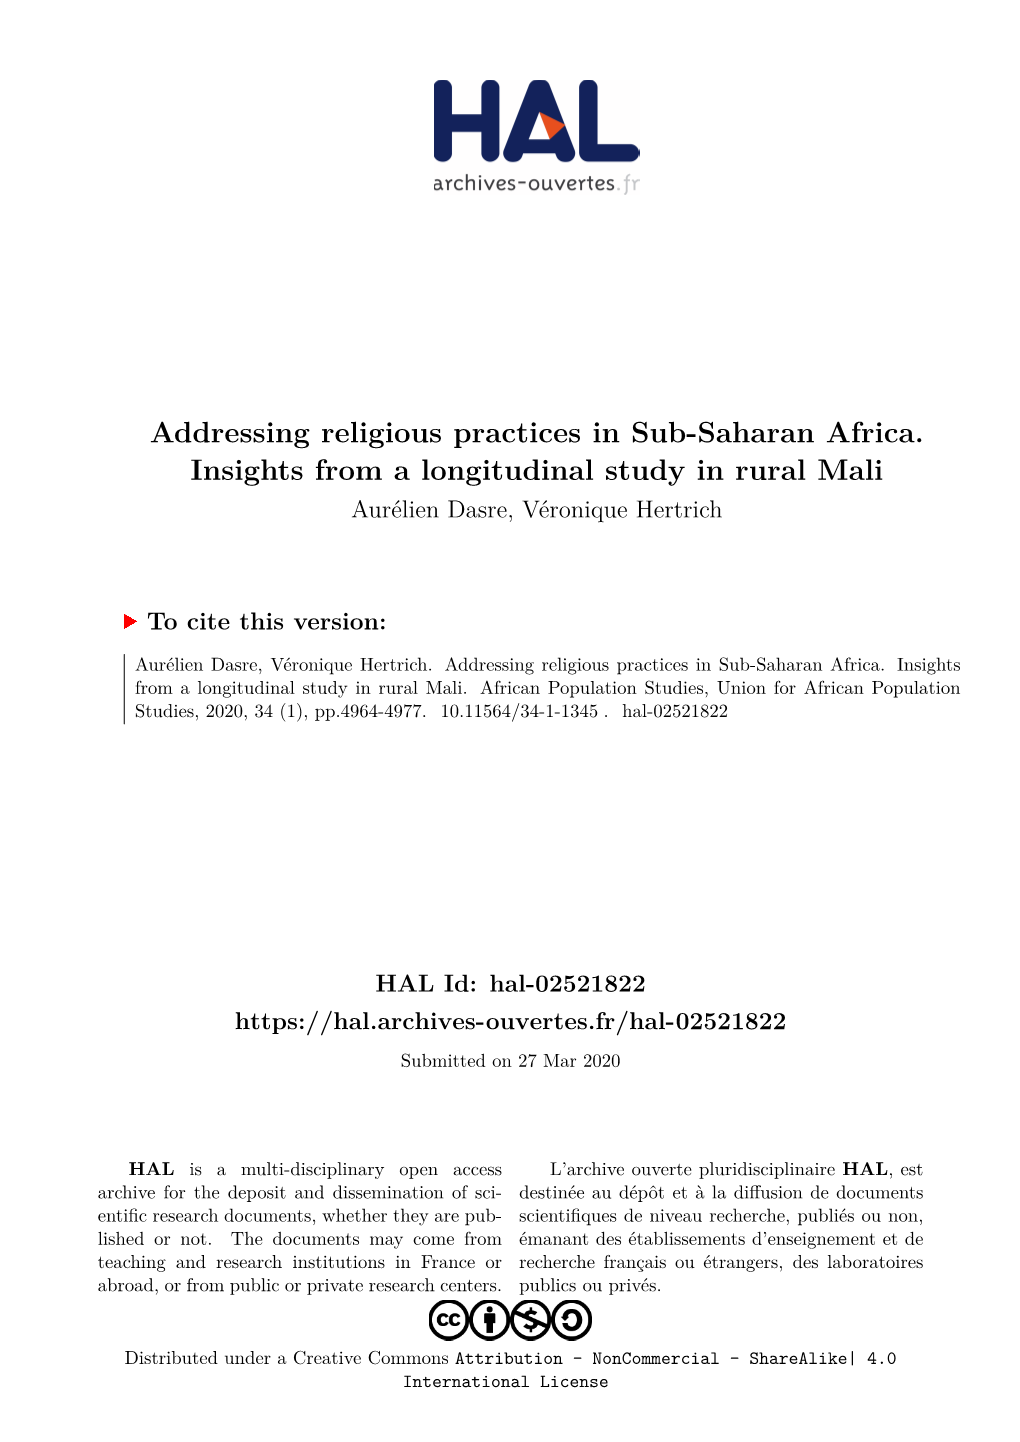 Addressing Religious Practices in Sub-Saharan Africa. Insights from a Longitudinal Study in Rural Mali Aurélien Dasre, Véronique Hertrich